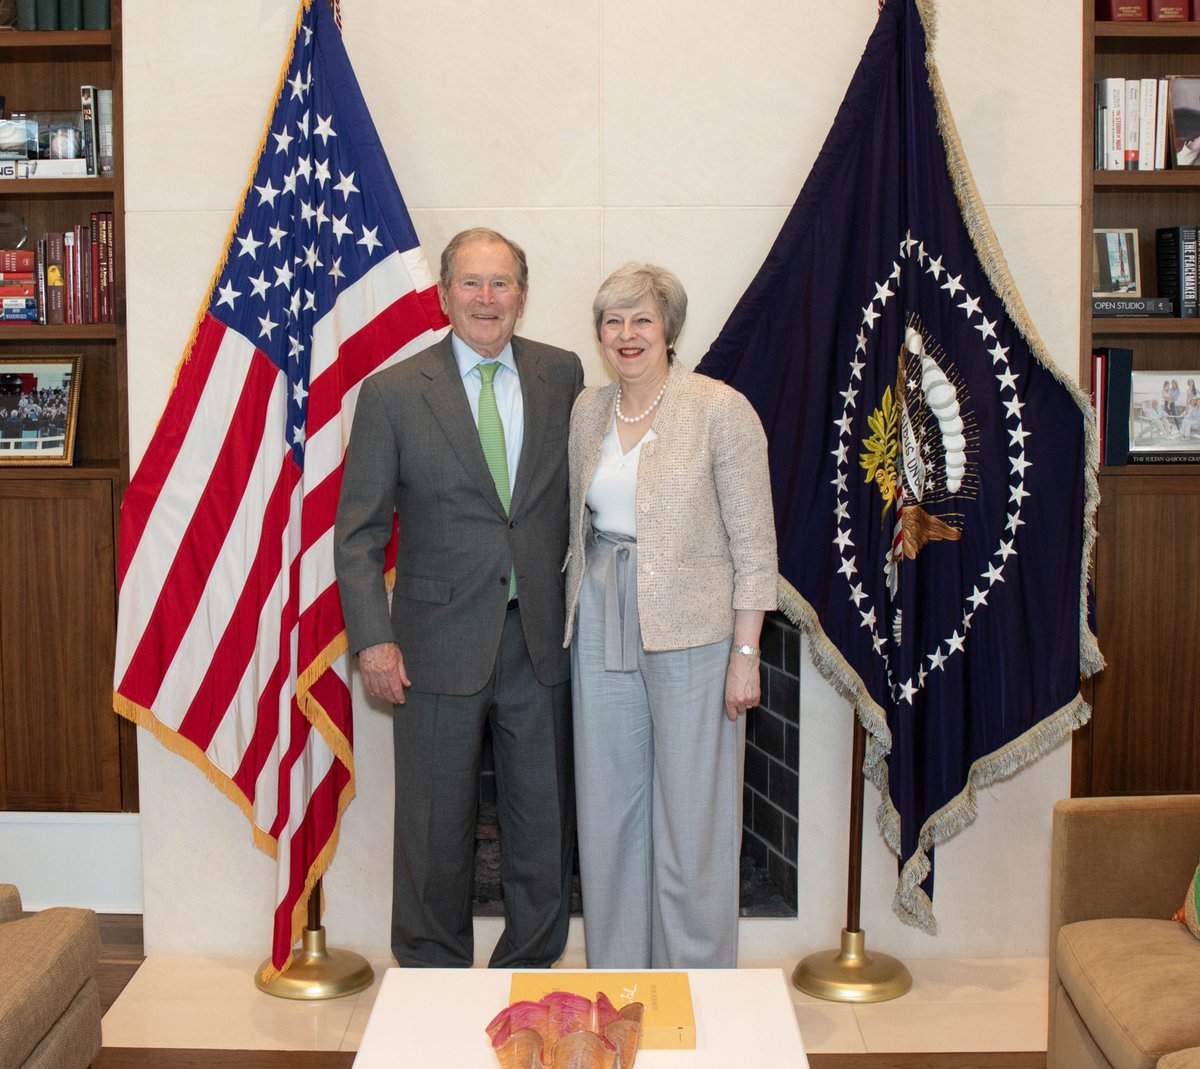 It was a pleasure to see President Bush again to discuss the special relationship between our two countries and the importance of defending our values in a world where they are increasingly under threat.